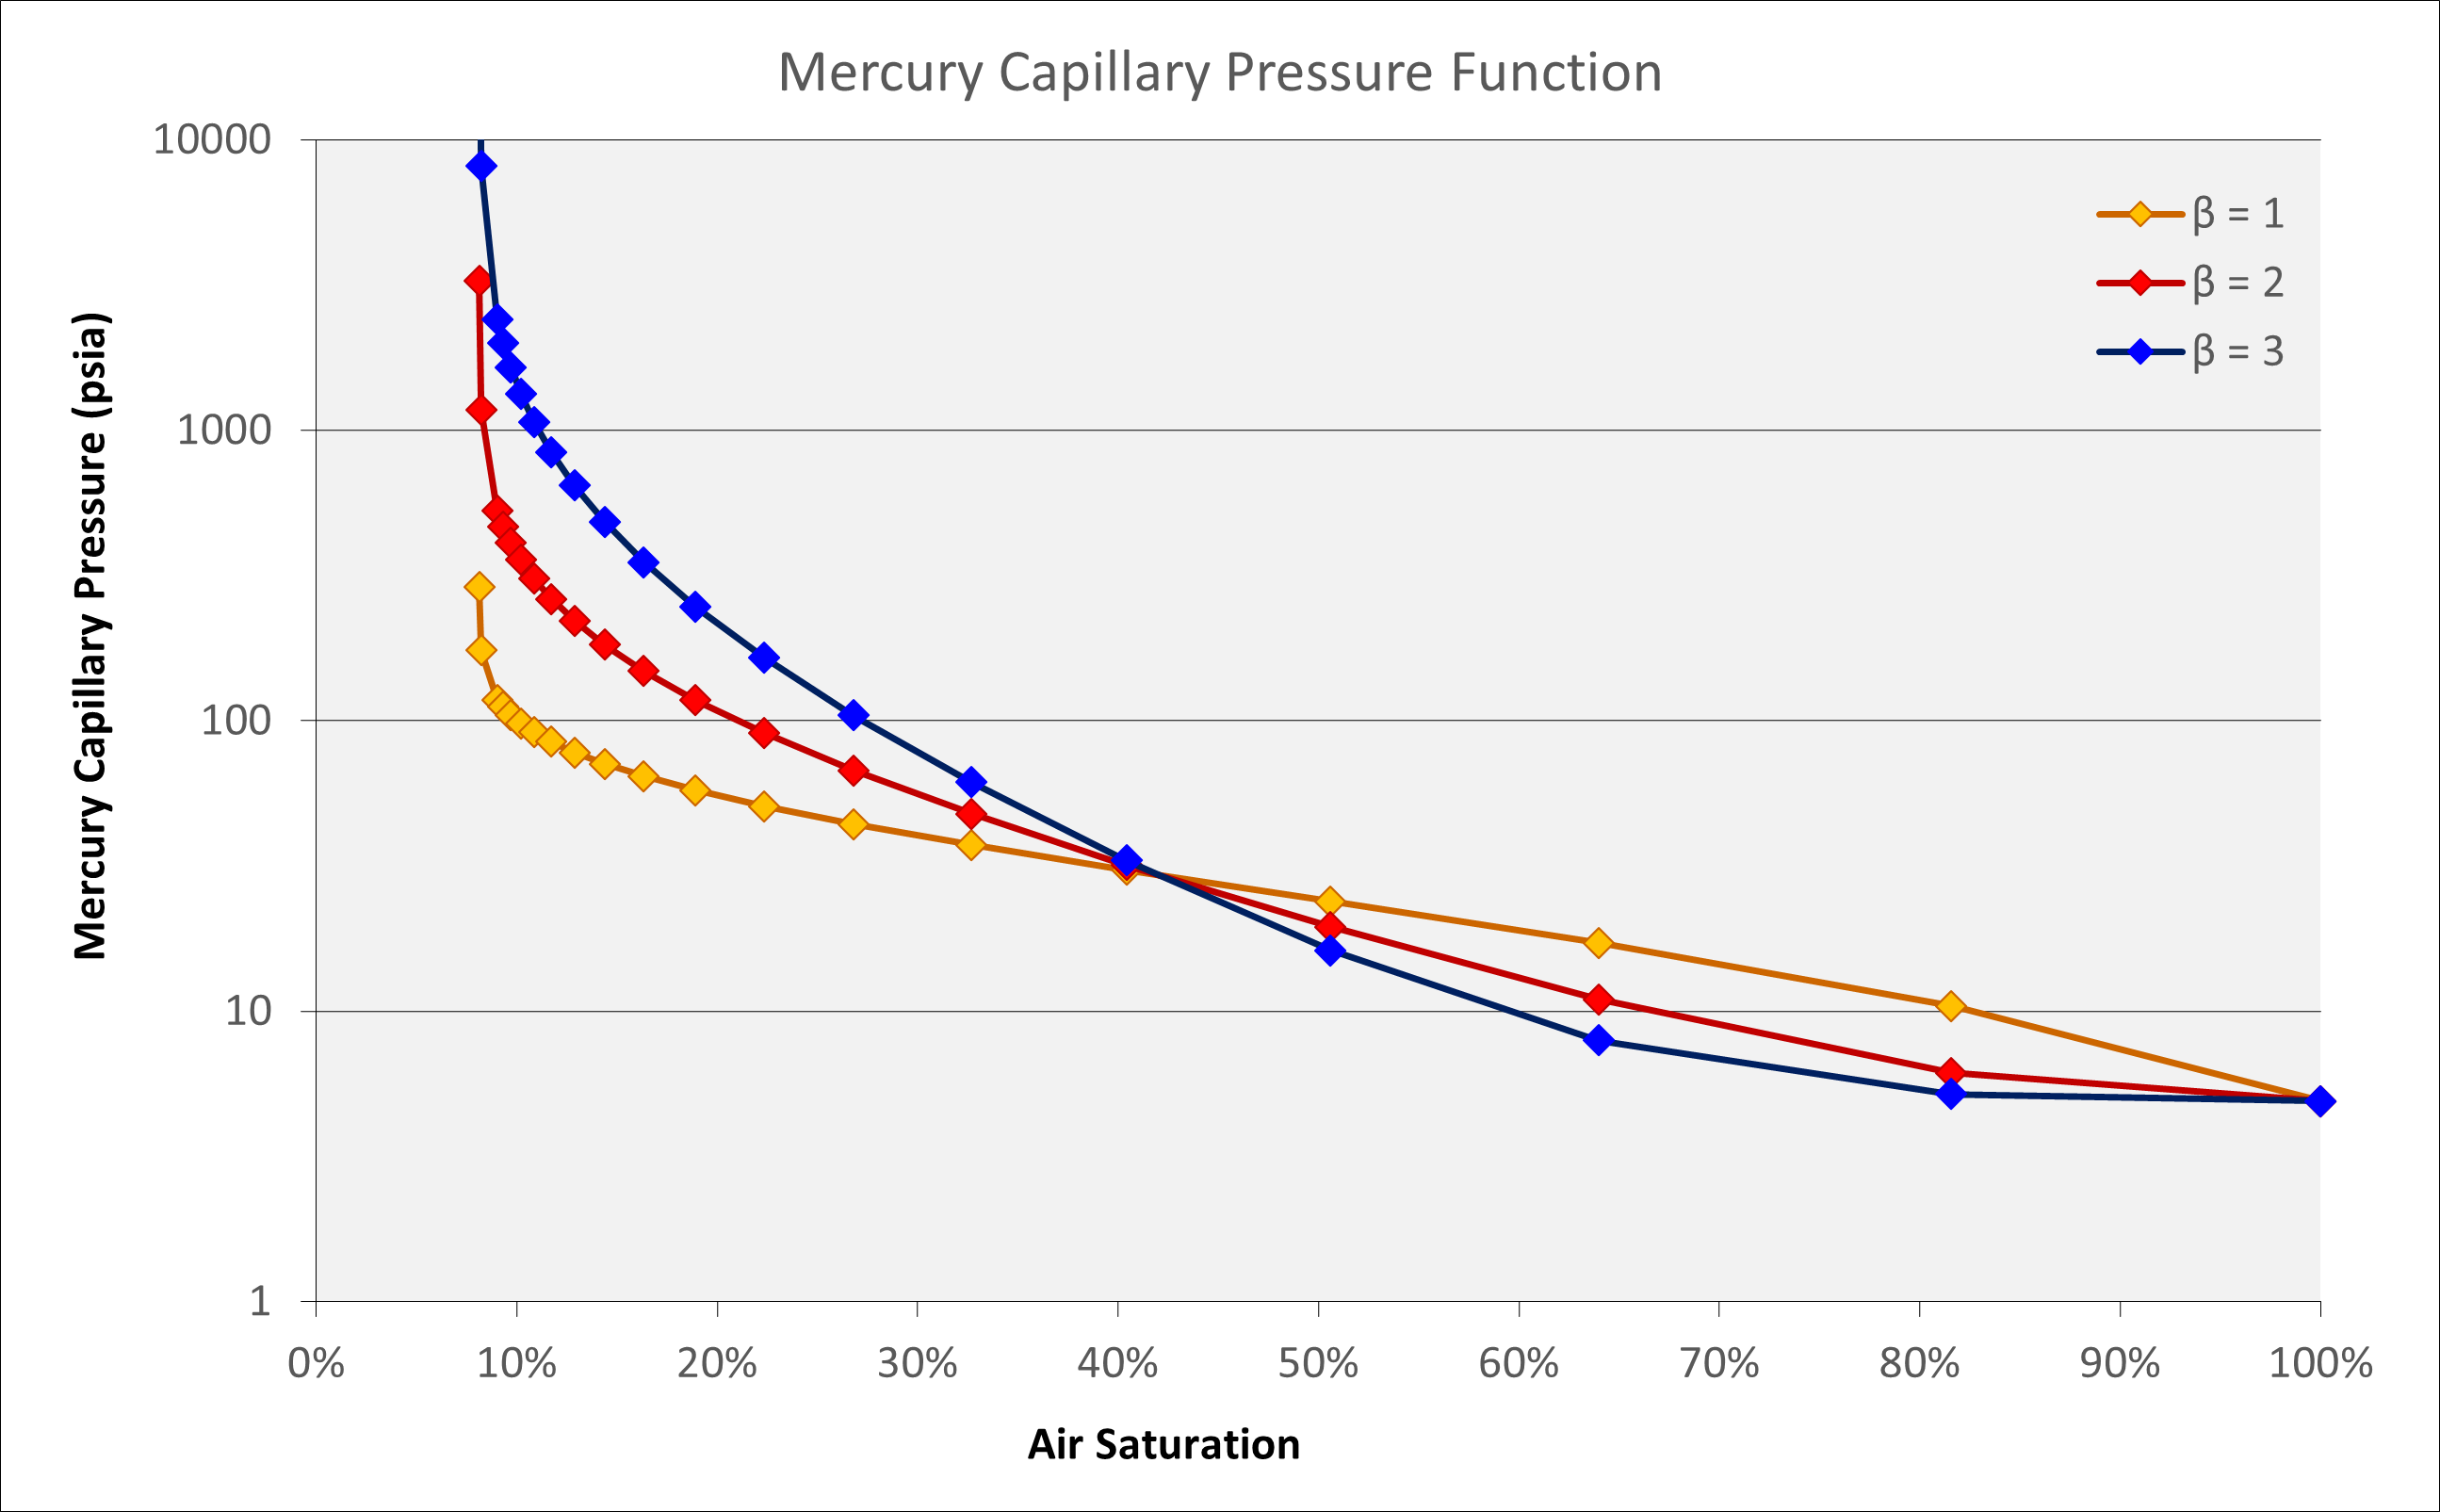 Modelled capillary pressure function and variation with shape factor.